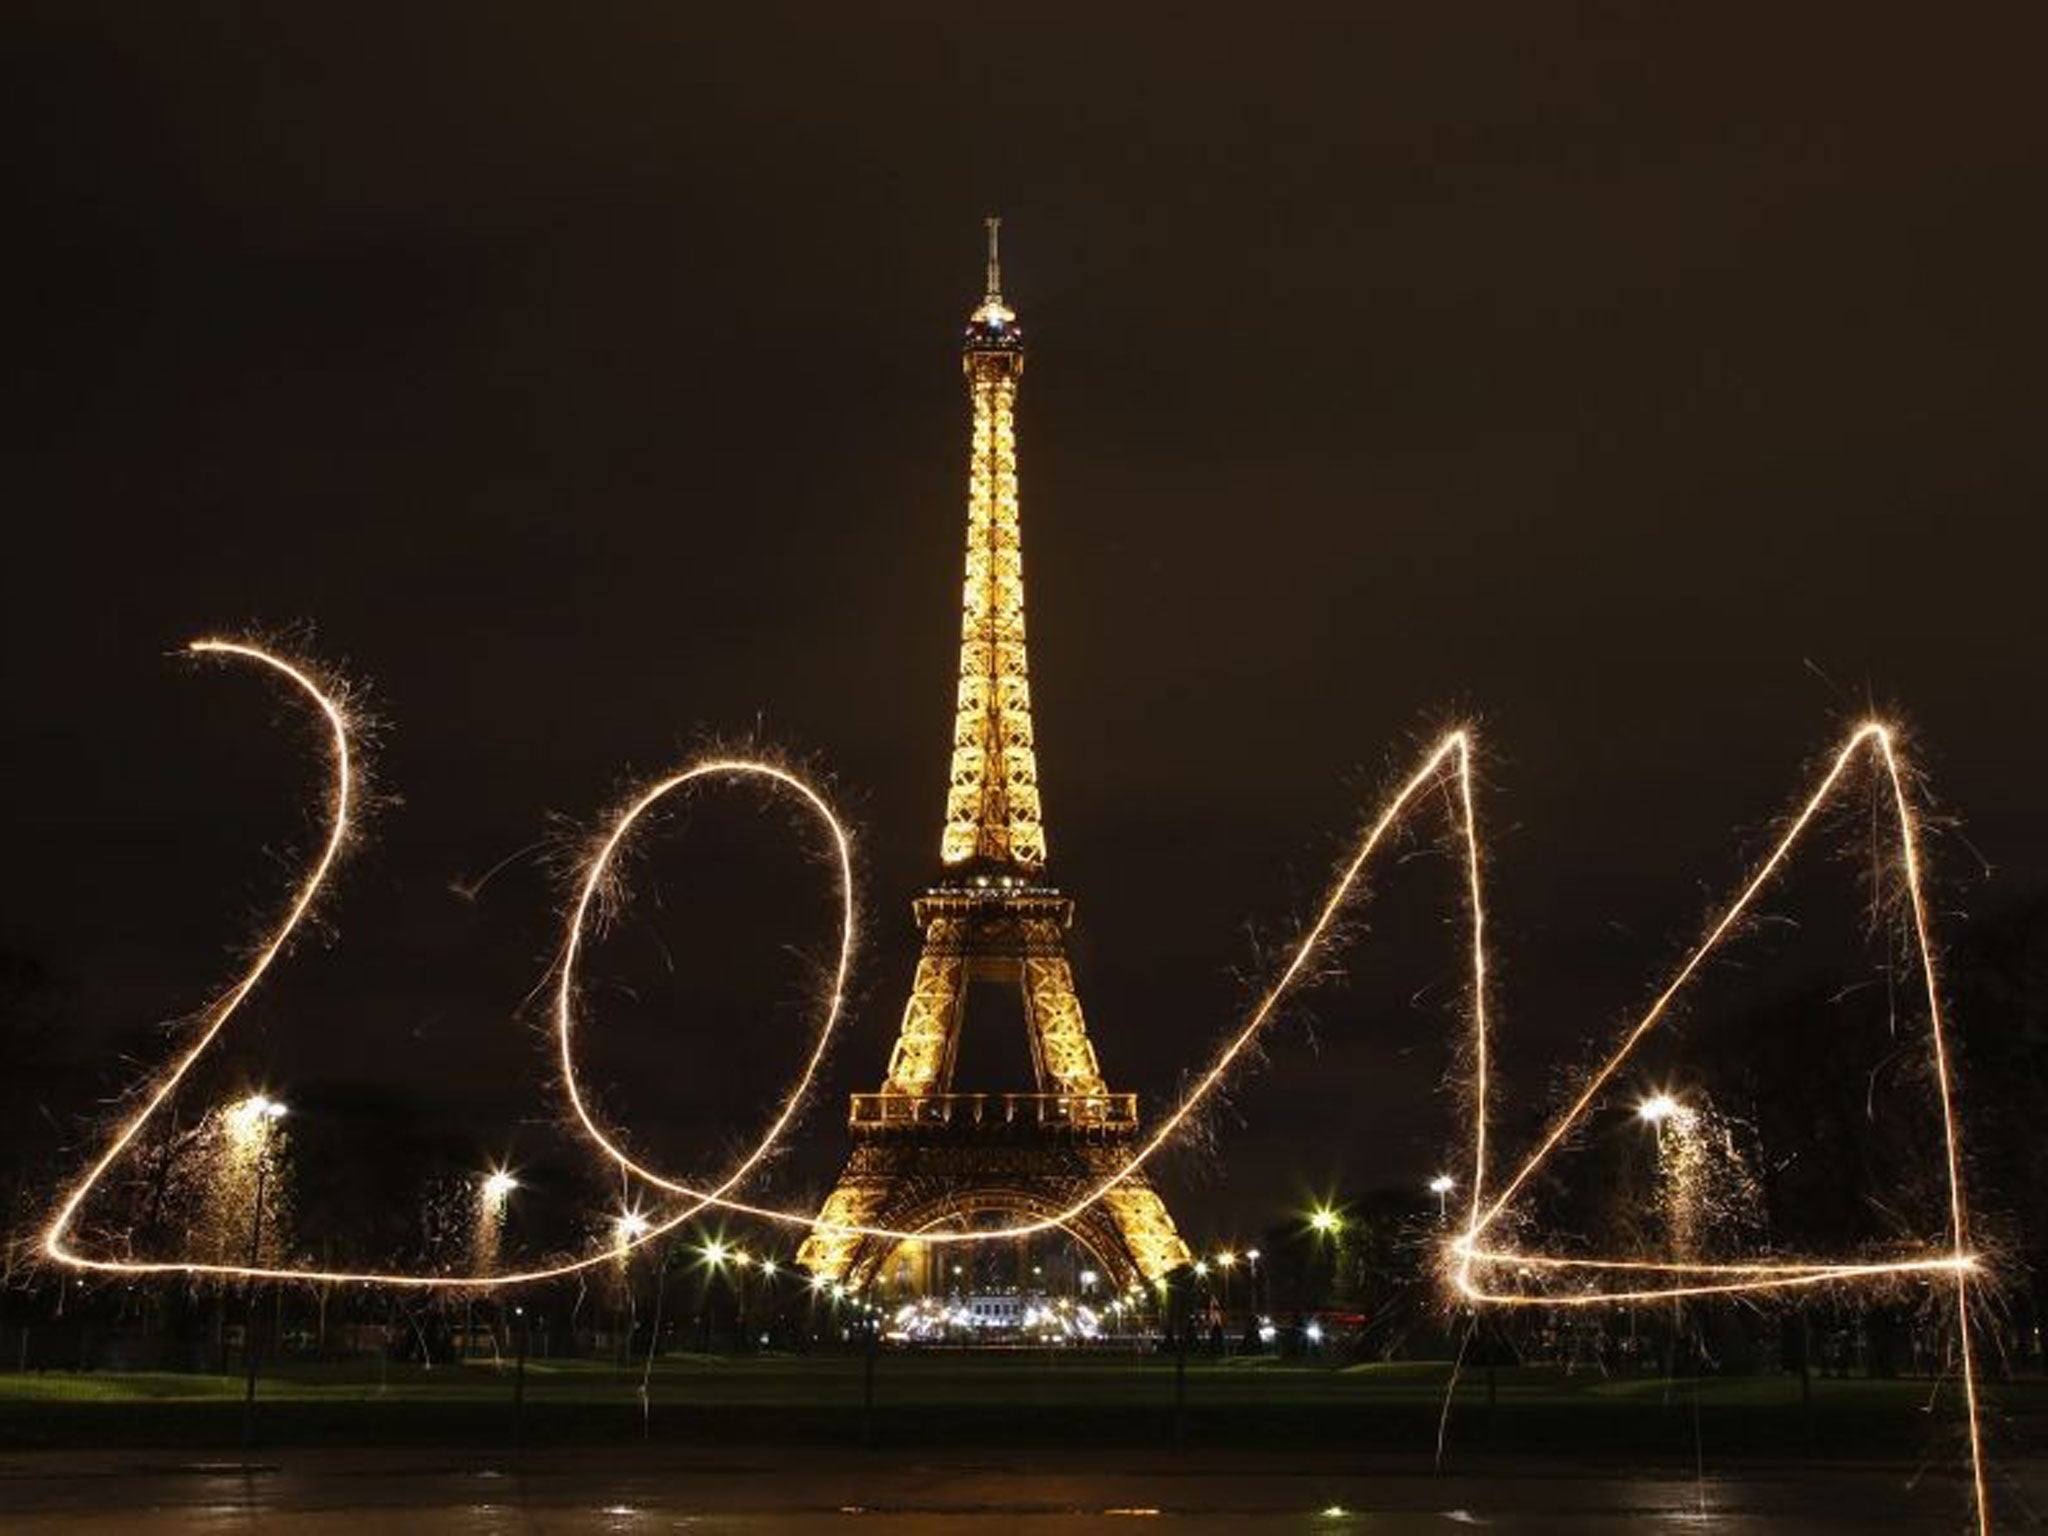 A reveller writes '2014' with sparklers ahead of New Year's Eve, in front of the Eiffel Tower in Paris